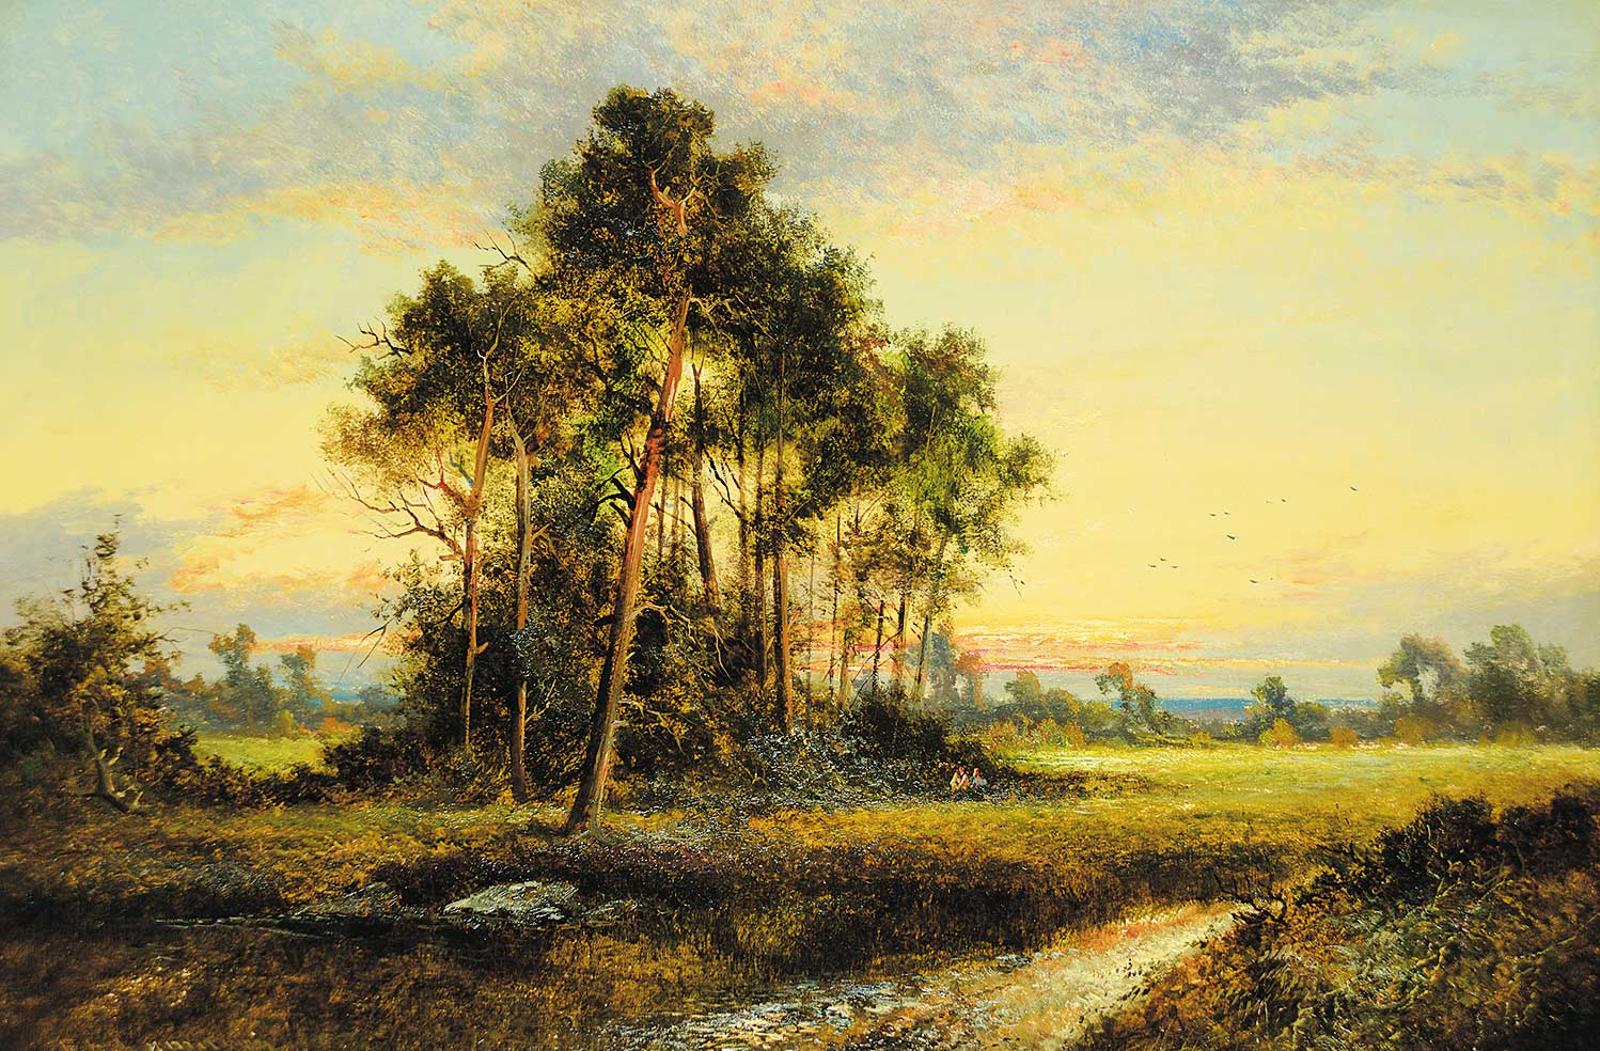 Frank E. Jamieson - Untitled - Sunset in the Forest